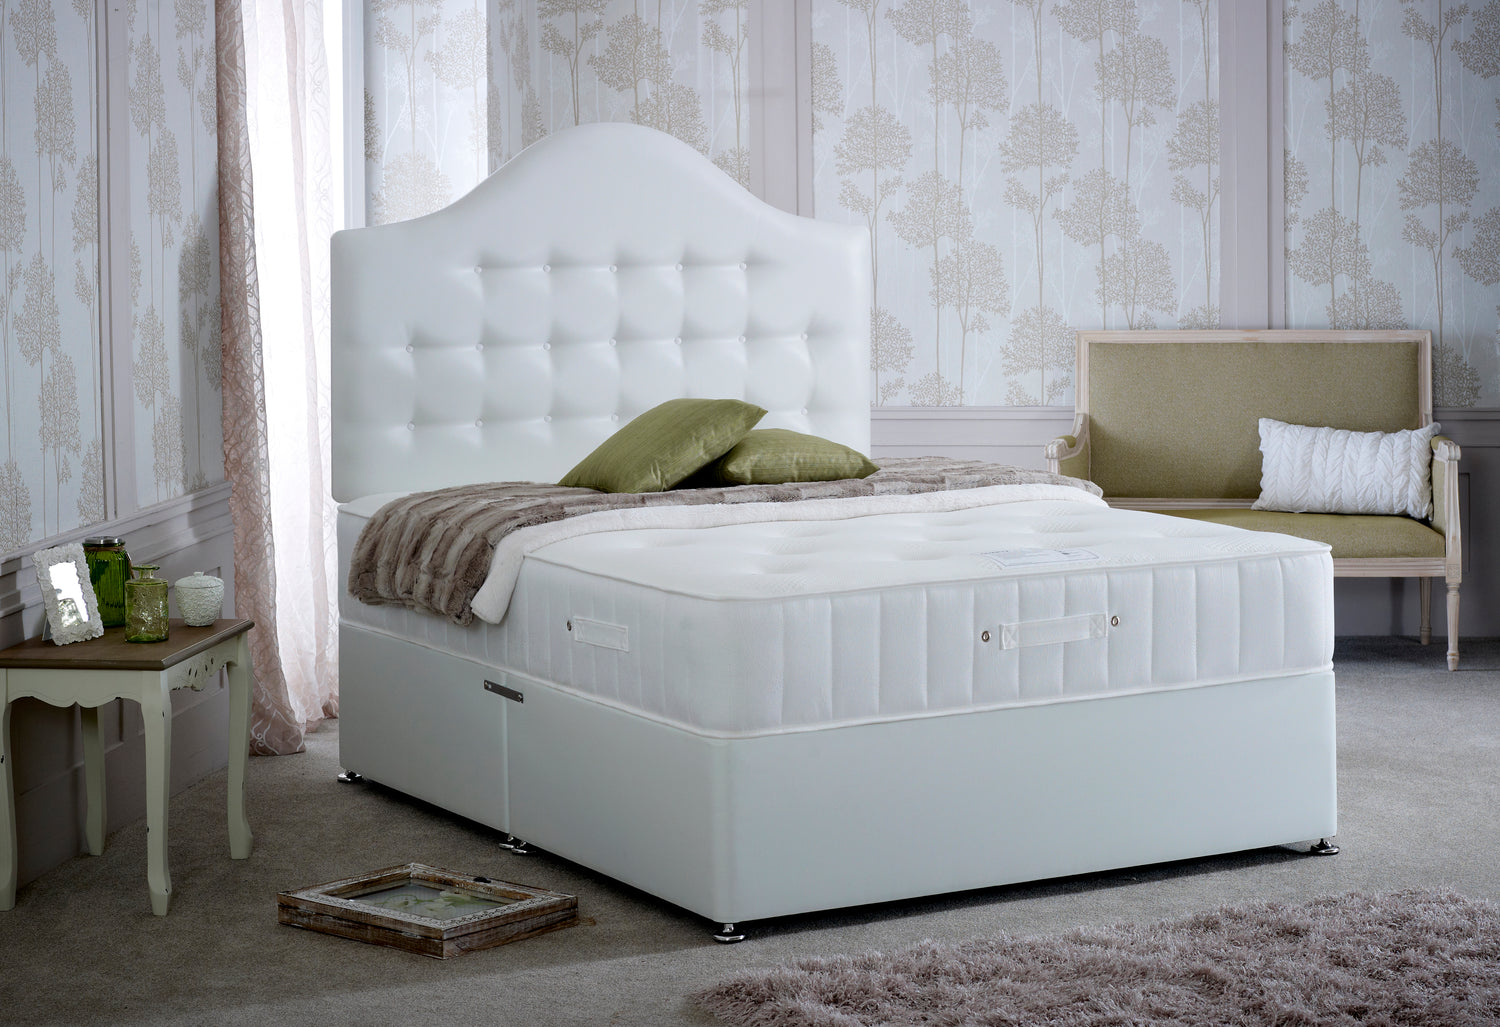 Bedmaster Quartz Mattress With A Bed Base-Better Bed Company 